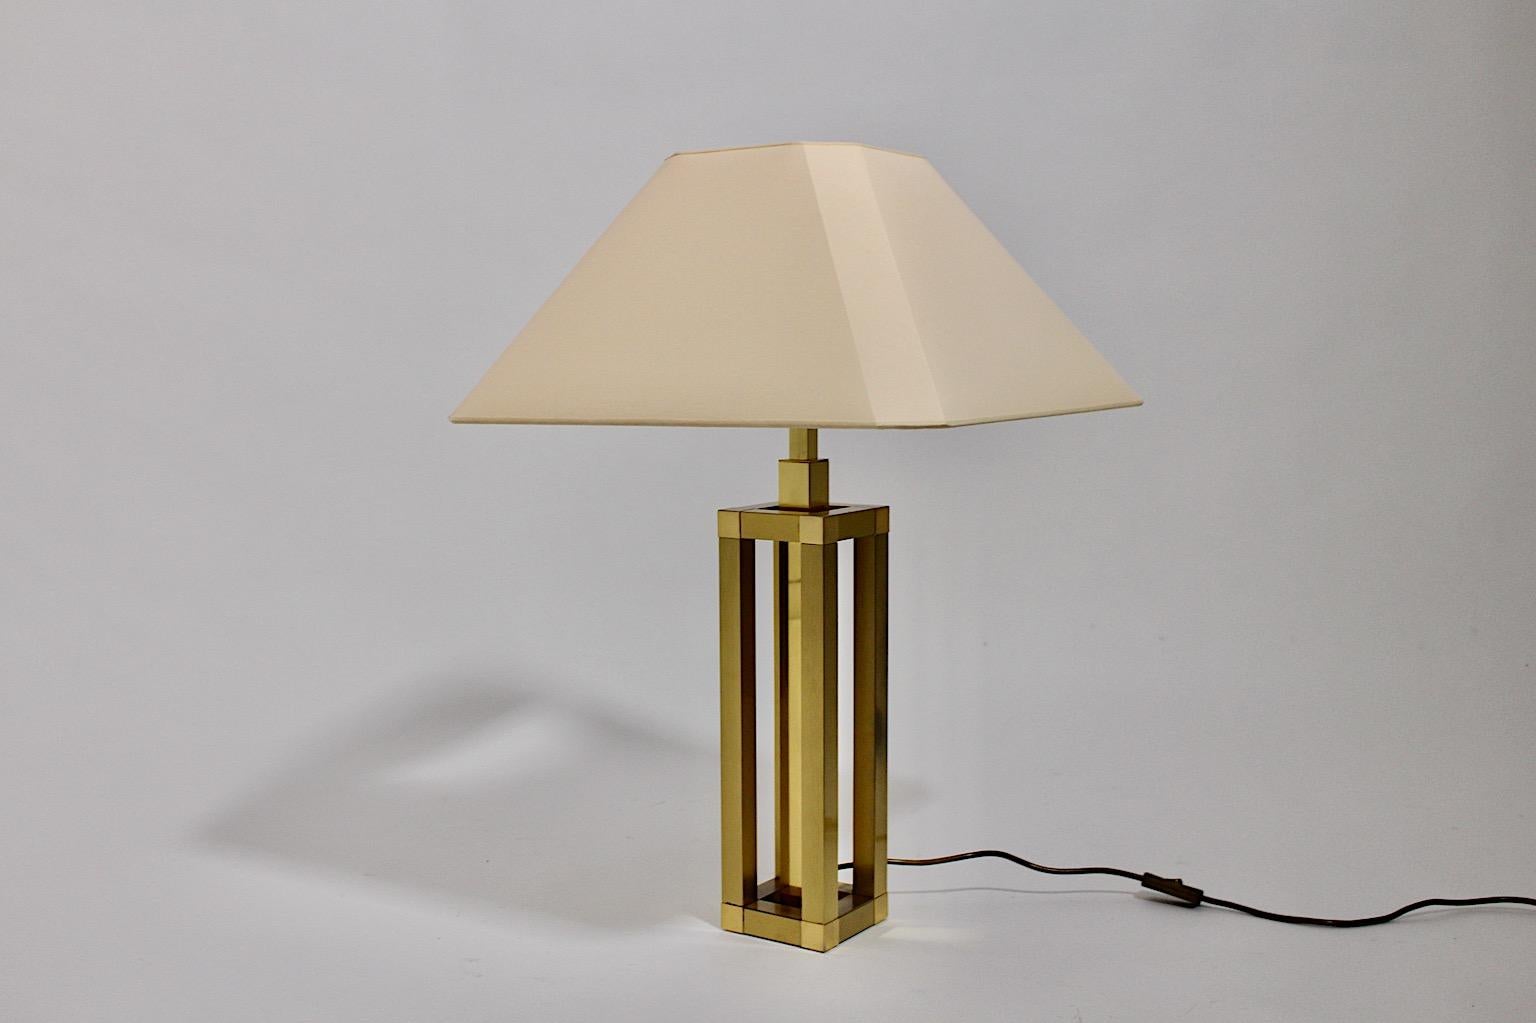 Hollywood Regency style vintage table lamp from brass, which design is very similar to Romeo Rega design Italy 1970s.
While the table lamp base shows a brass construction in geometric shape, the renewed lamp shade shows an ivory color tone. The